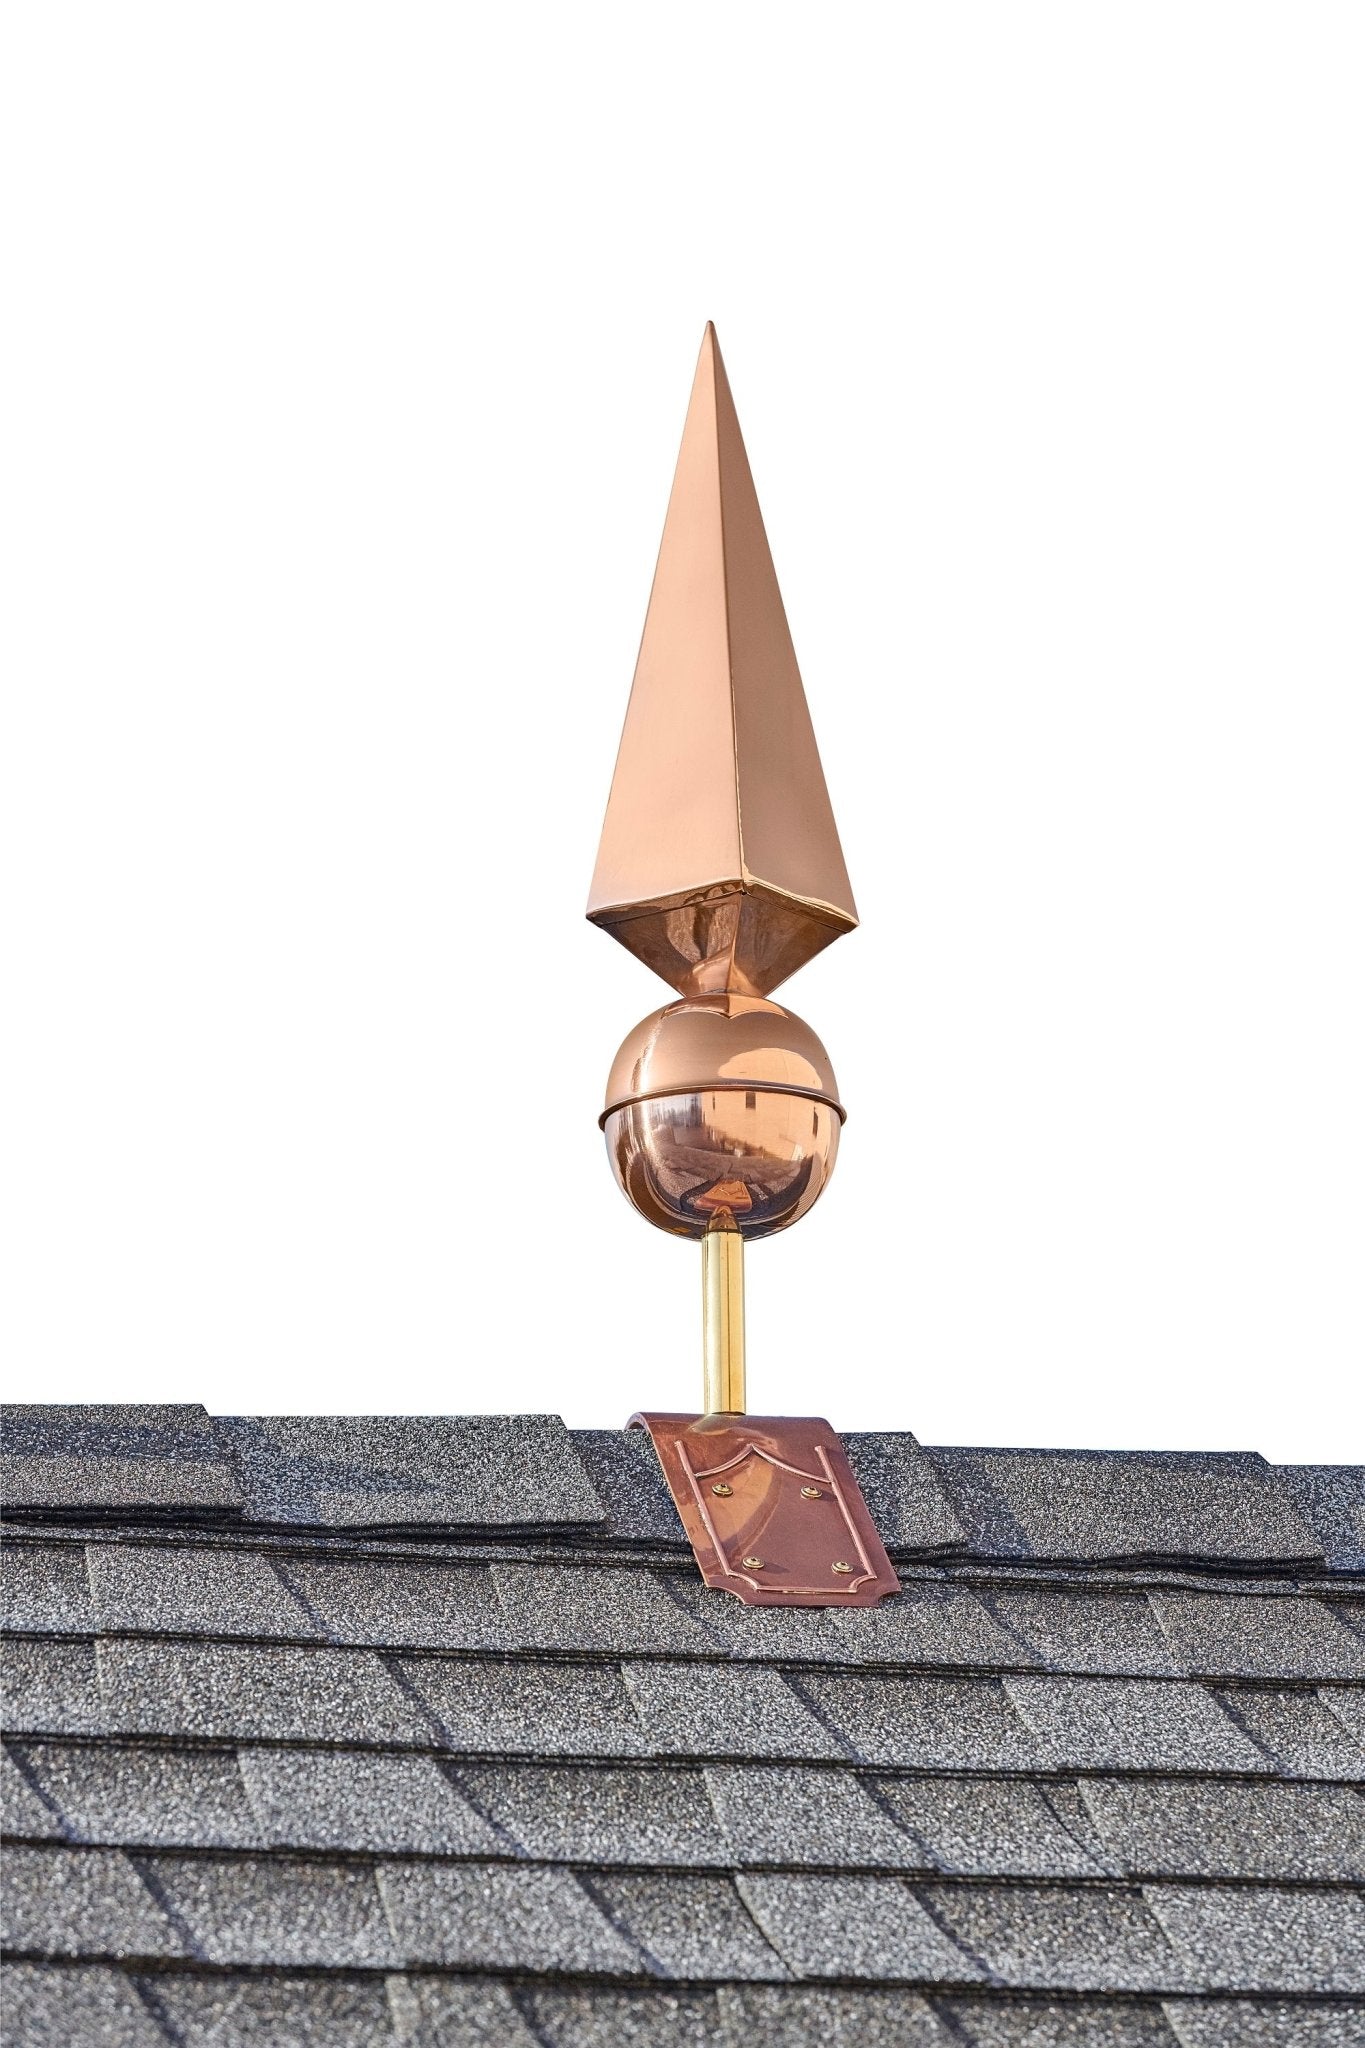 24" Lancelot Finial with Decorative Roof Mount   - Good Directions